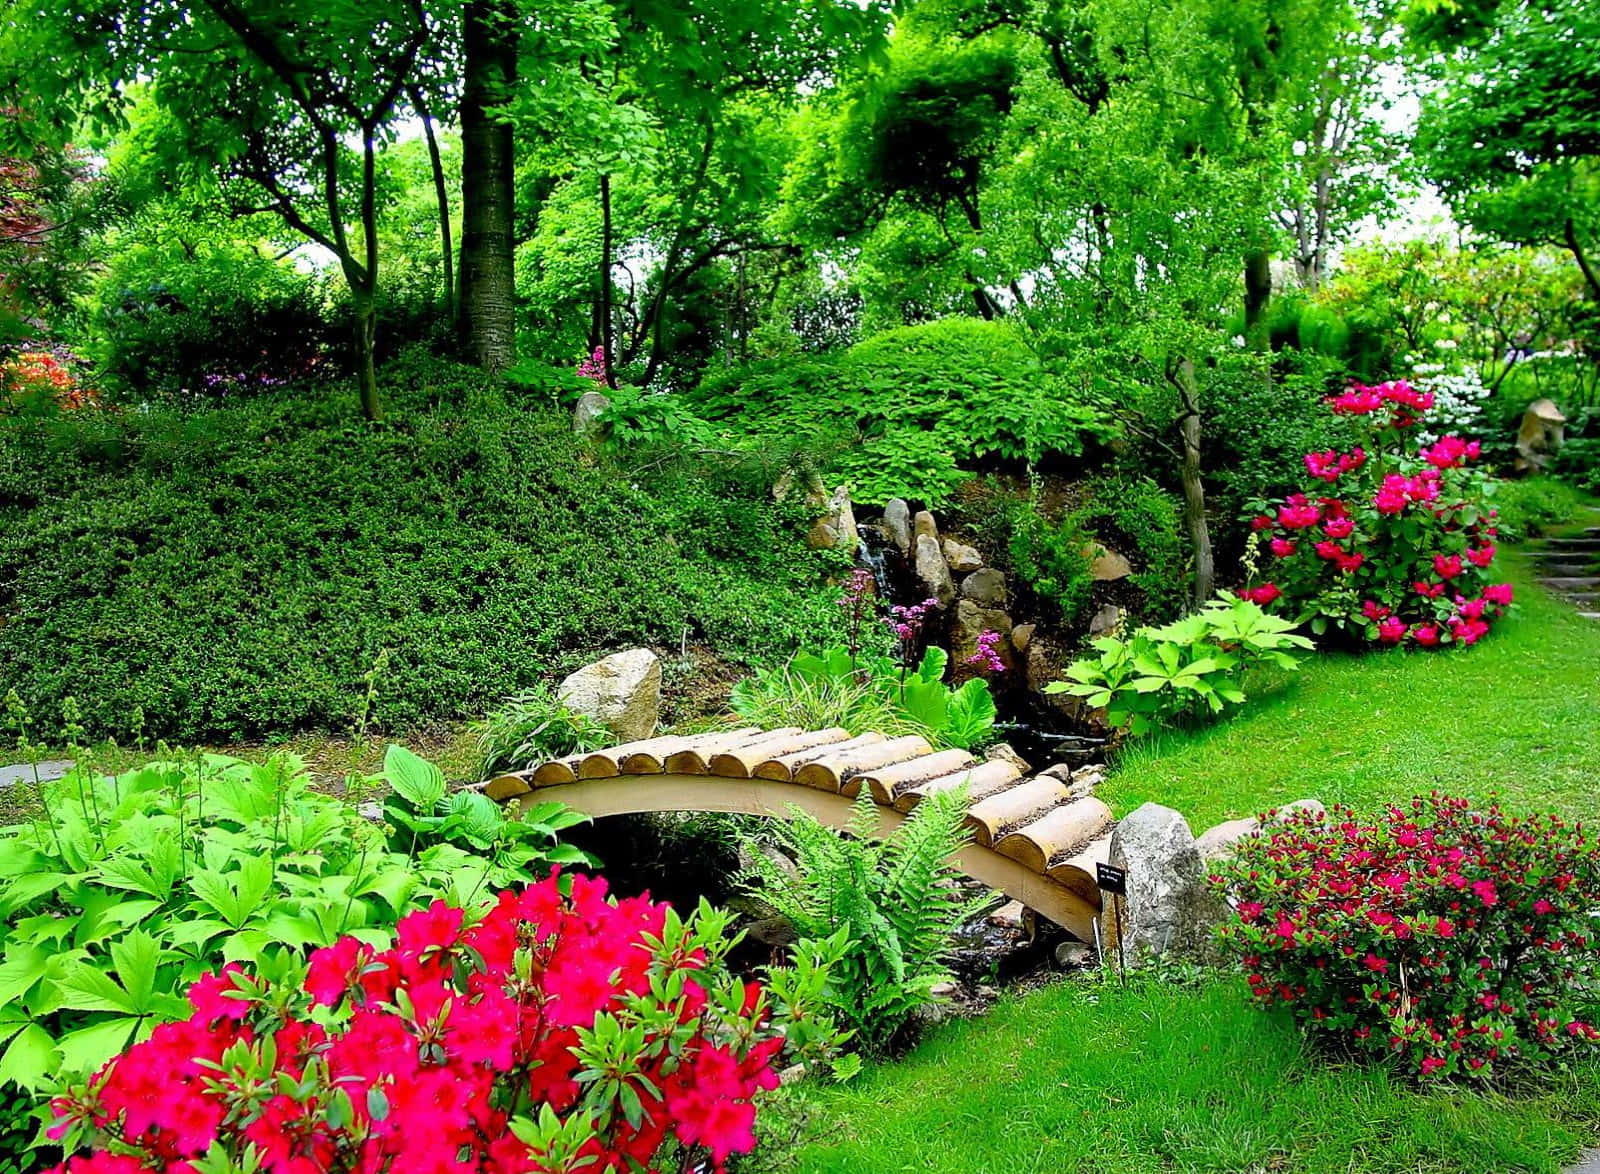 Feel the serenity of Nature in a Garden